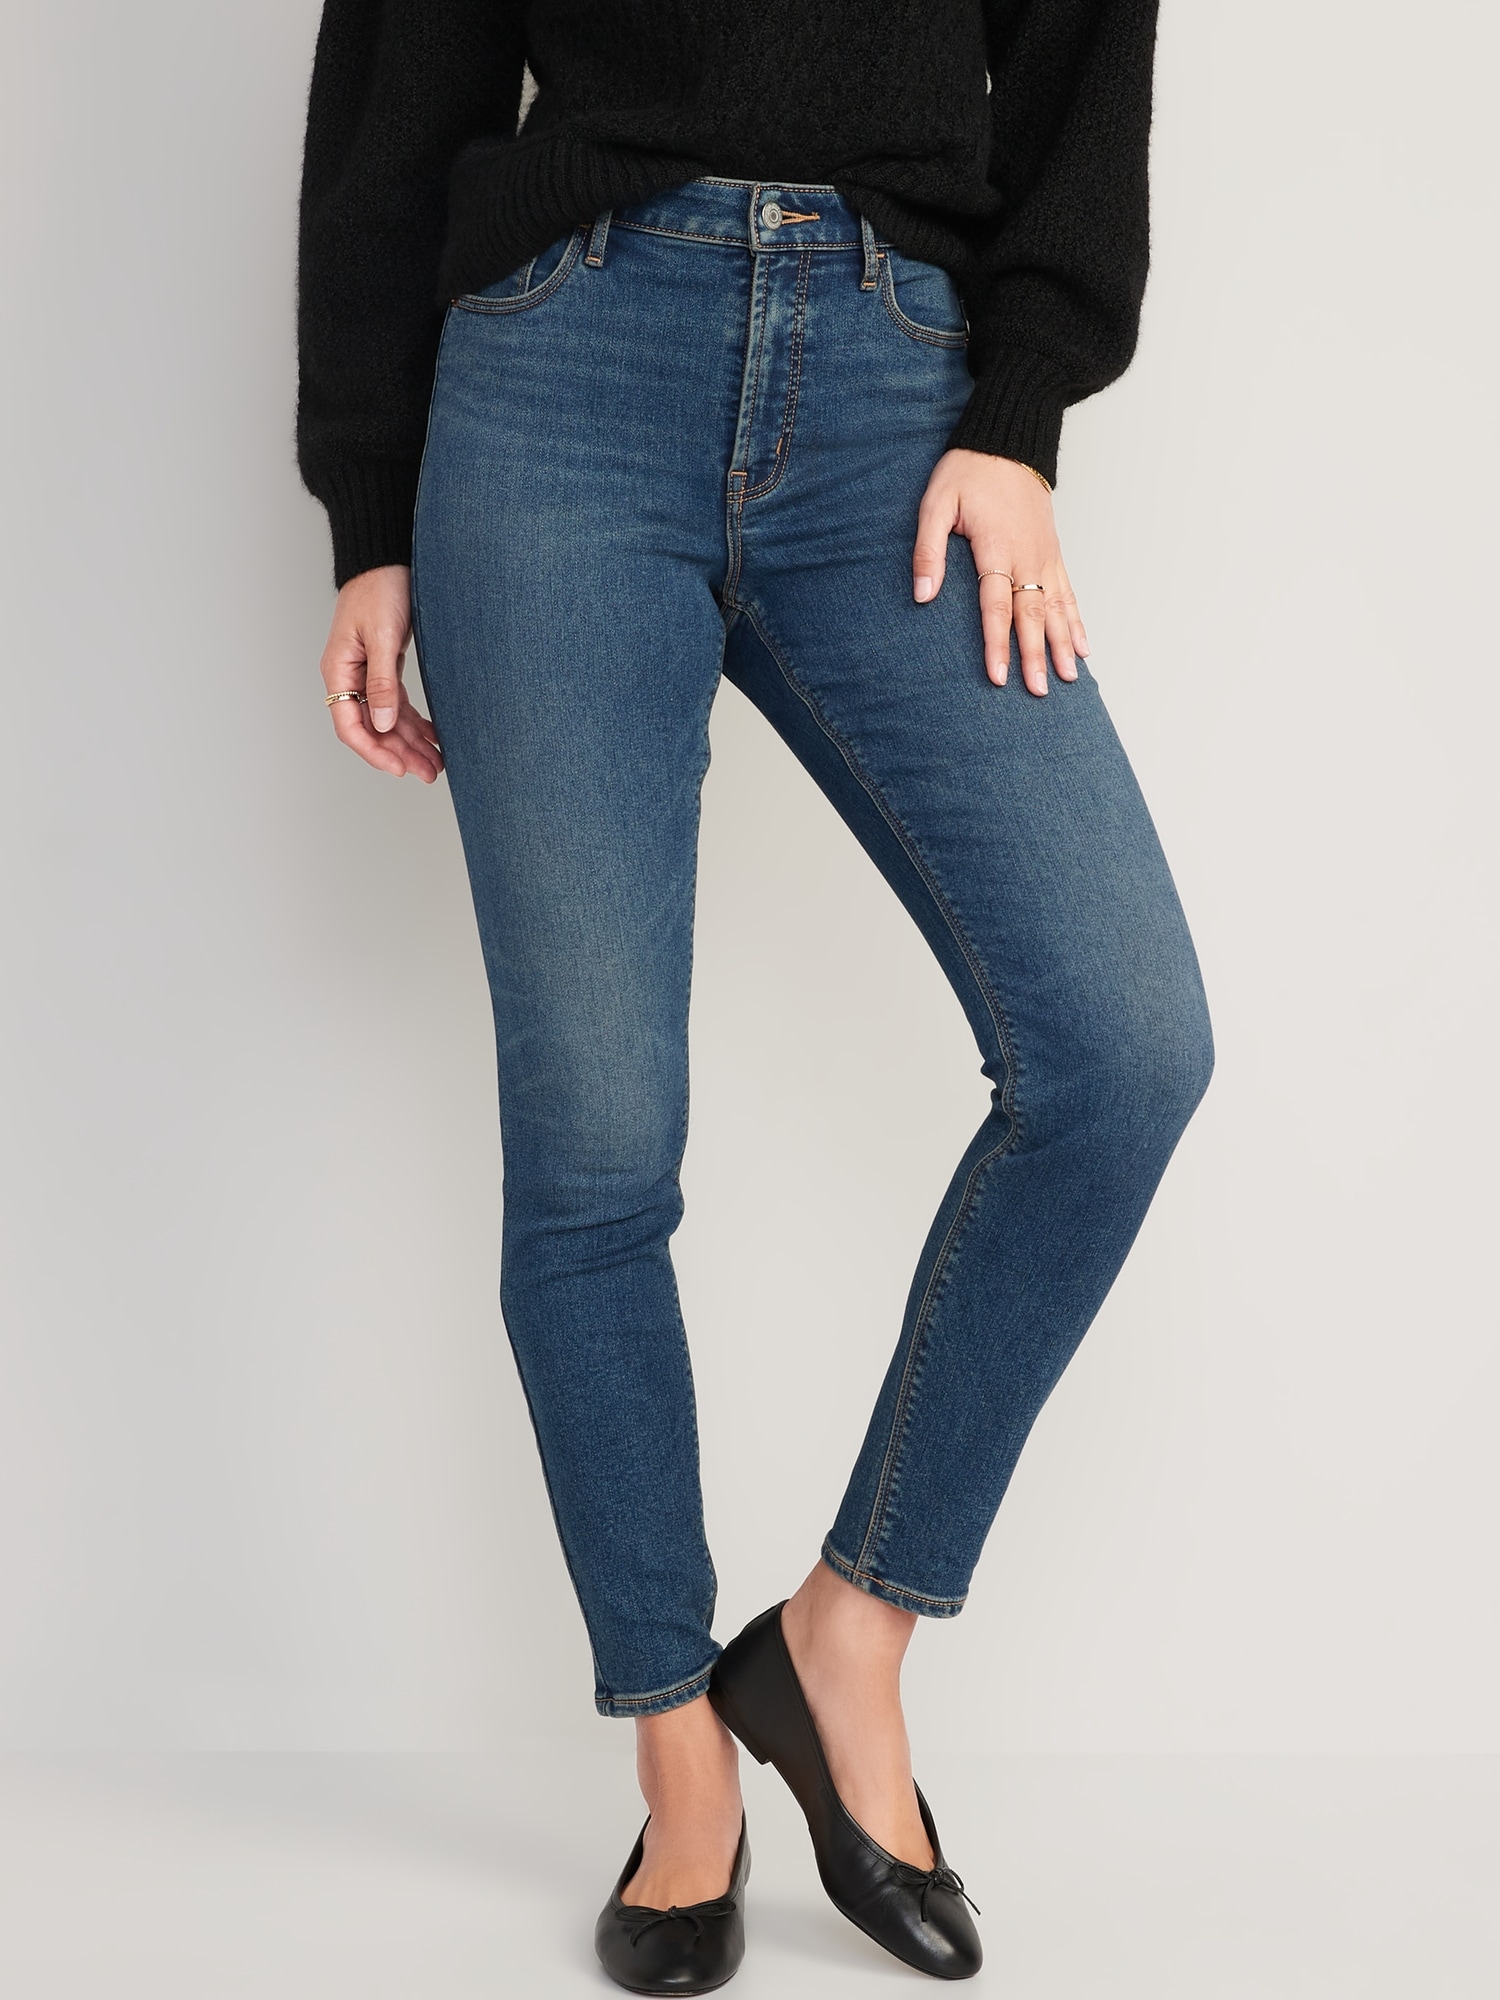 High-Waisted Built-In Warm Rockstar Super-Skinny Jeans for Women